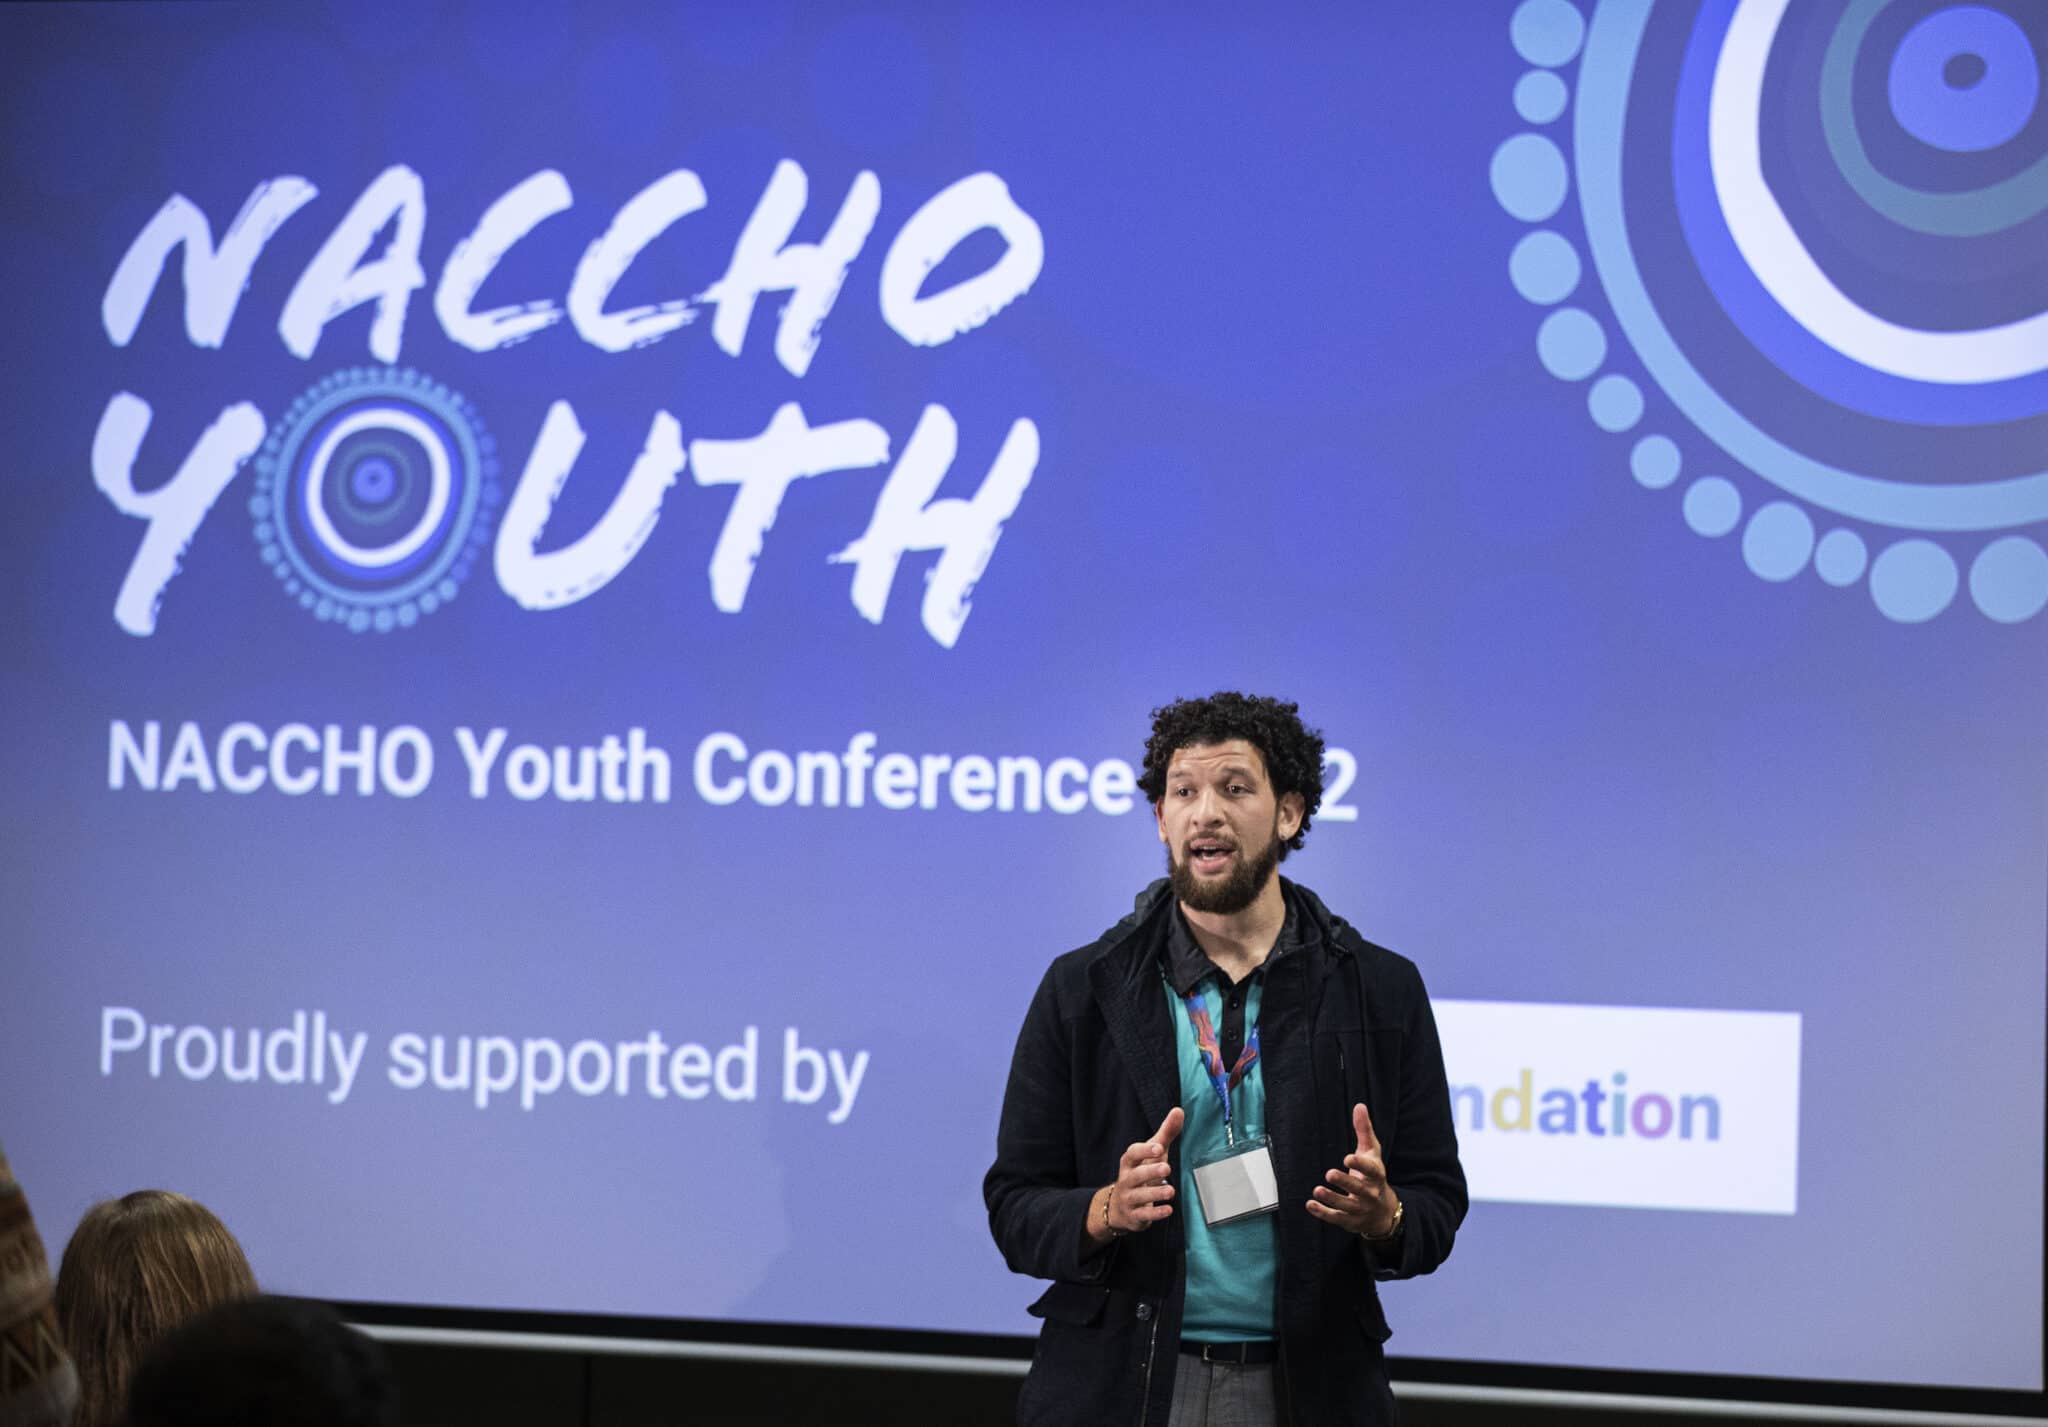 Youth Conference NACCHO